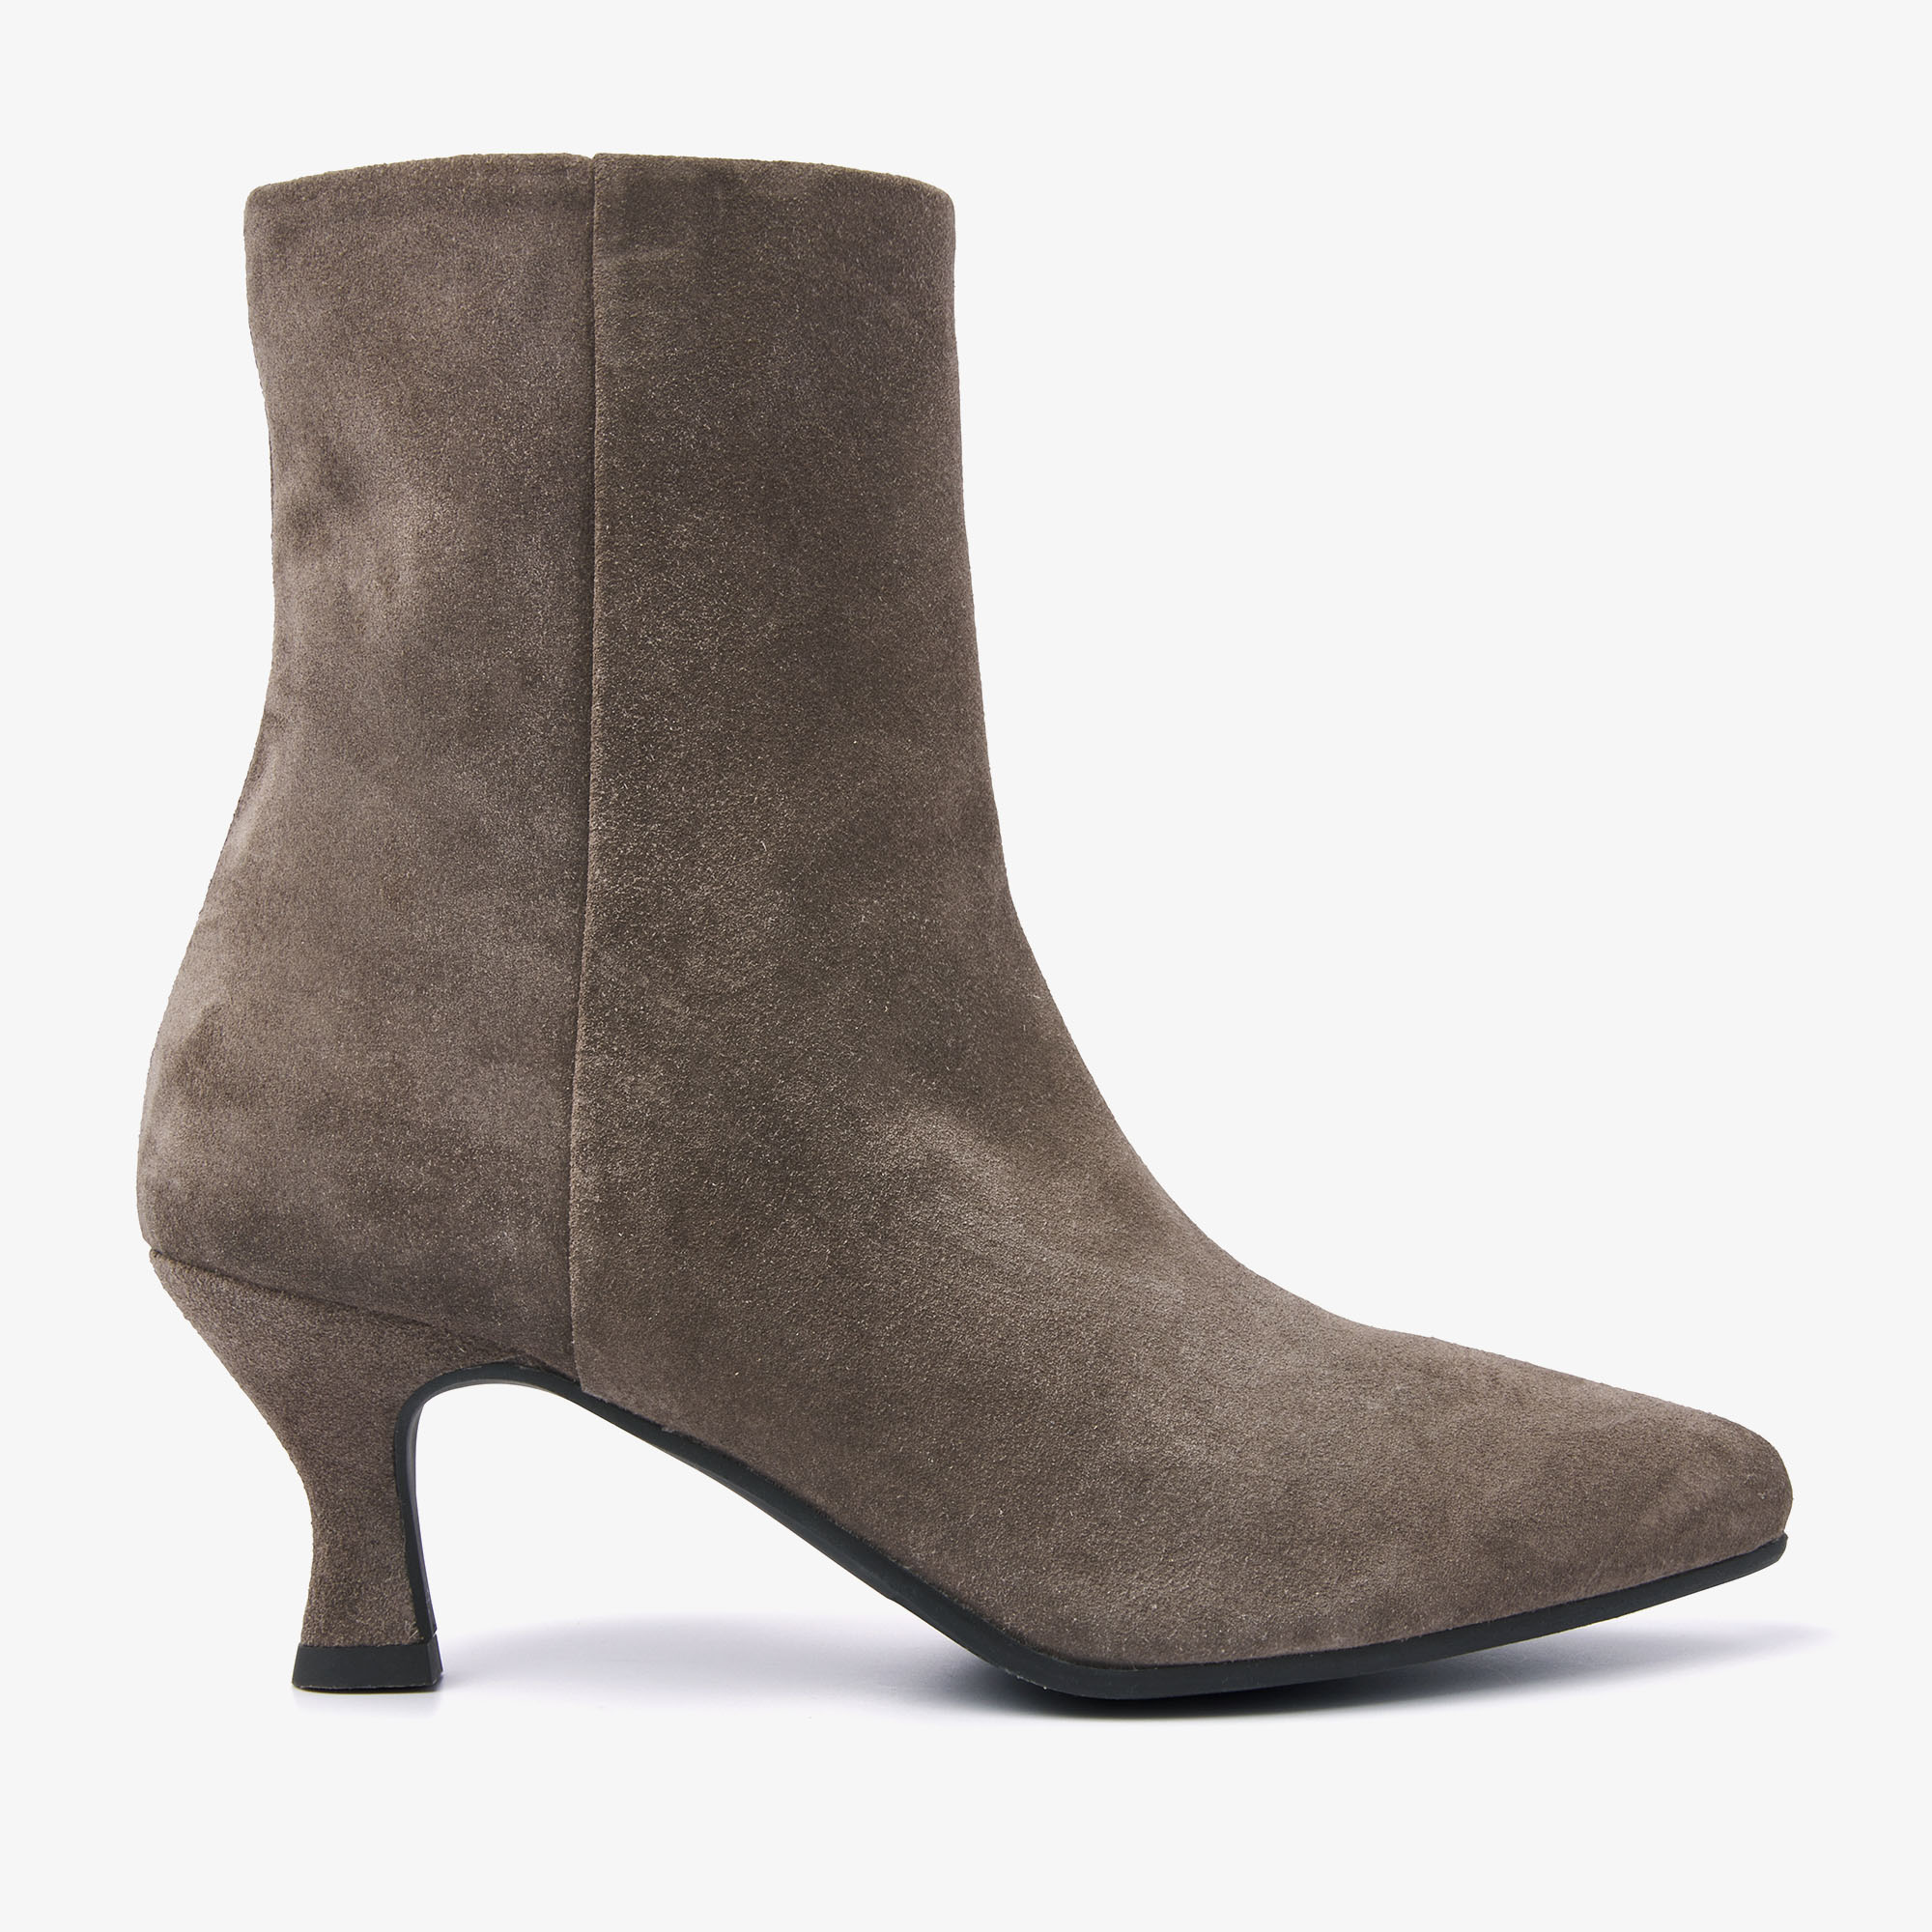 VIA VAI Noelle Rox grey ankle boots